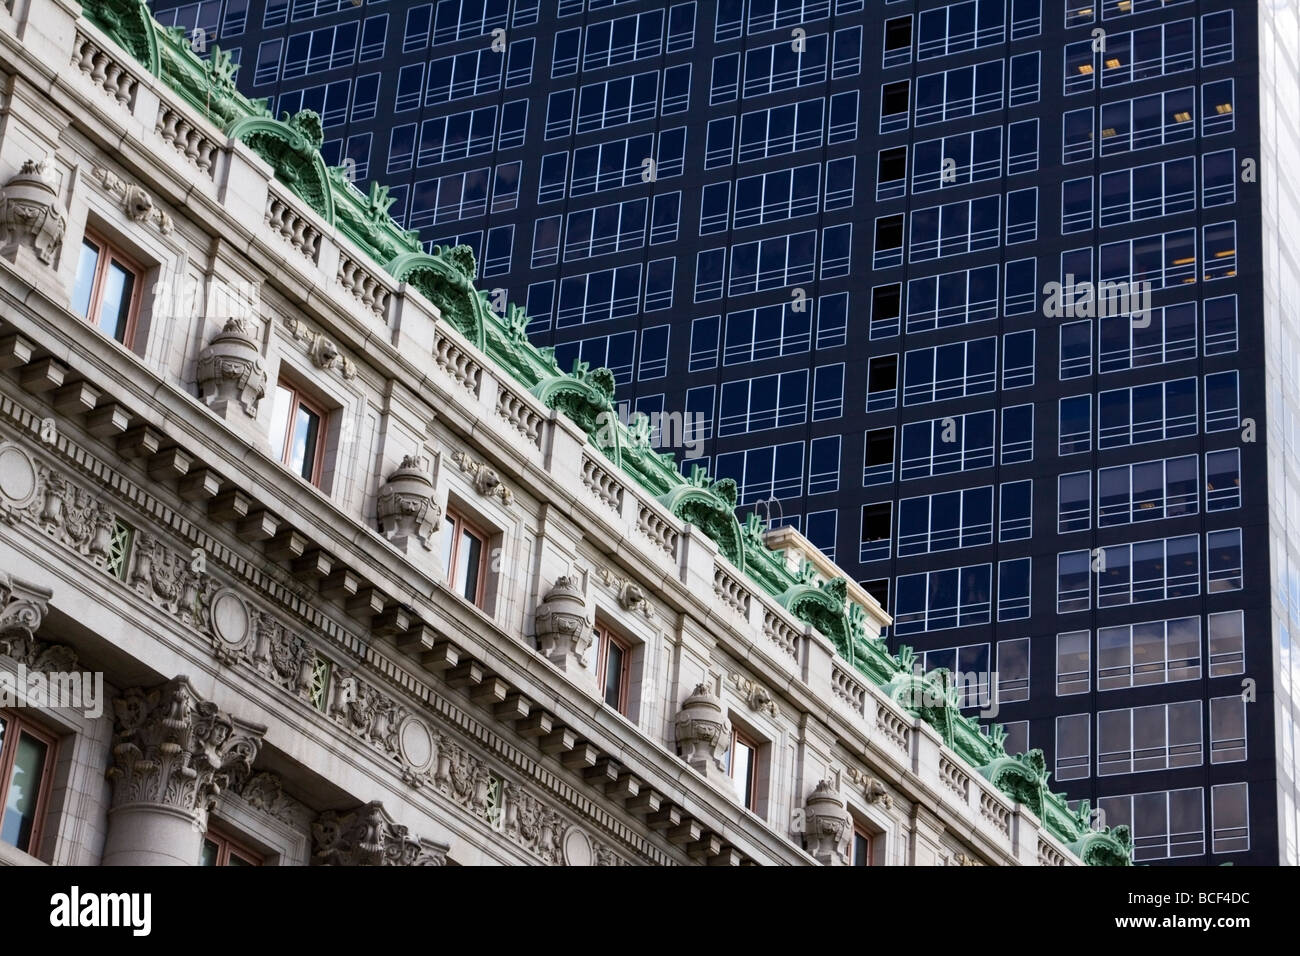 New York, showing the contrast between Old and New buildings Stock Photo